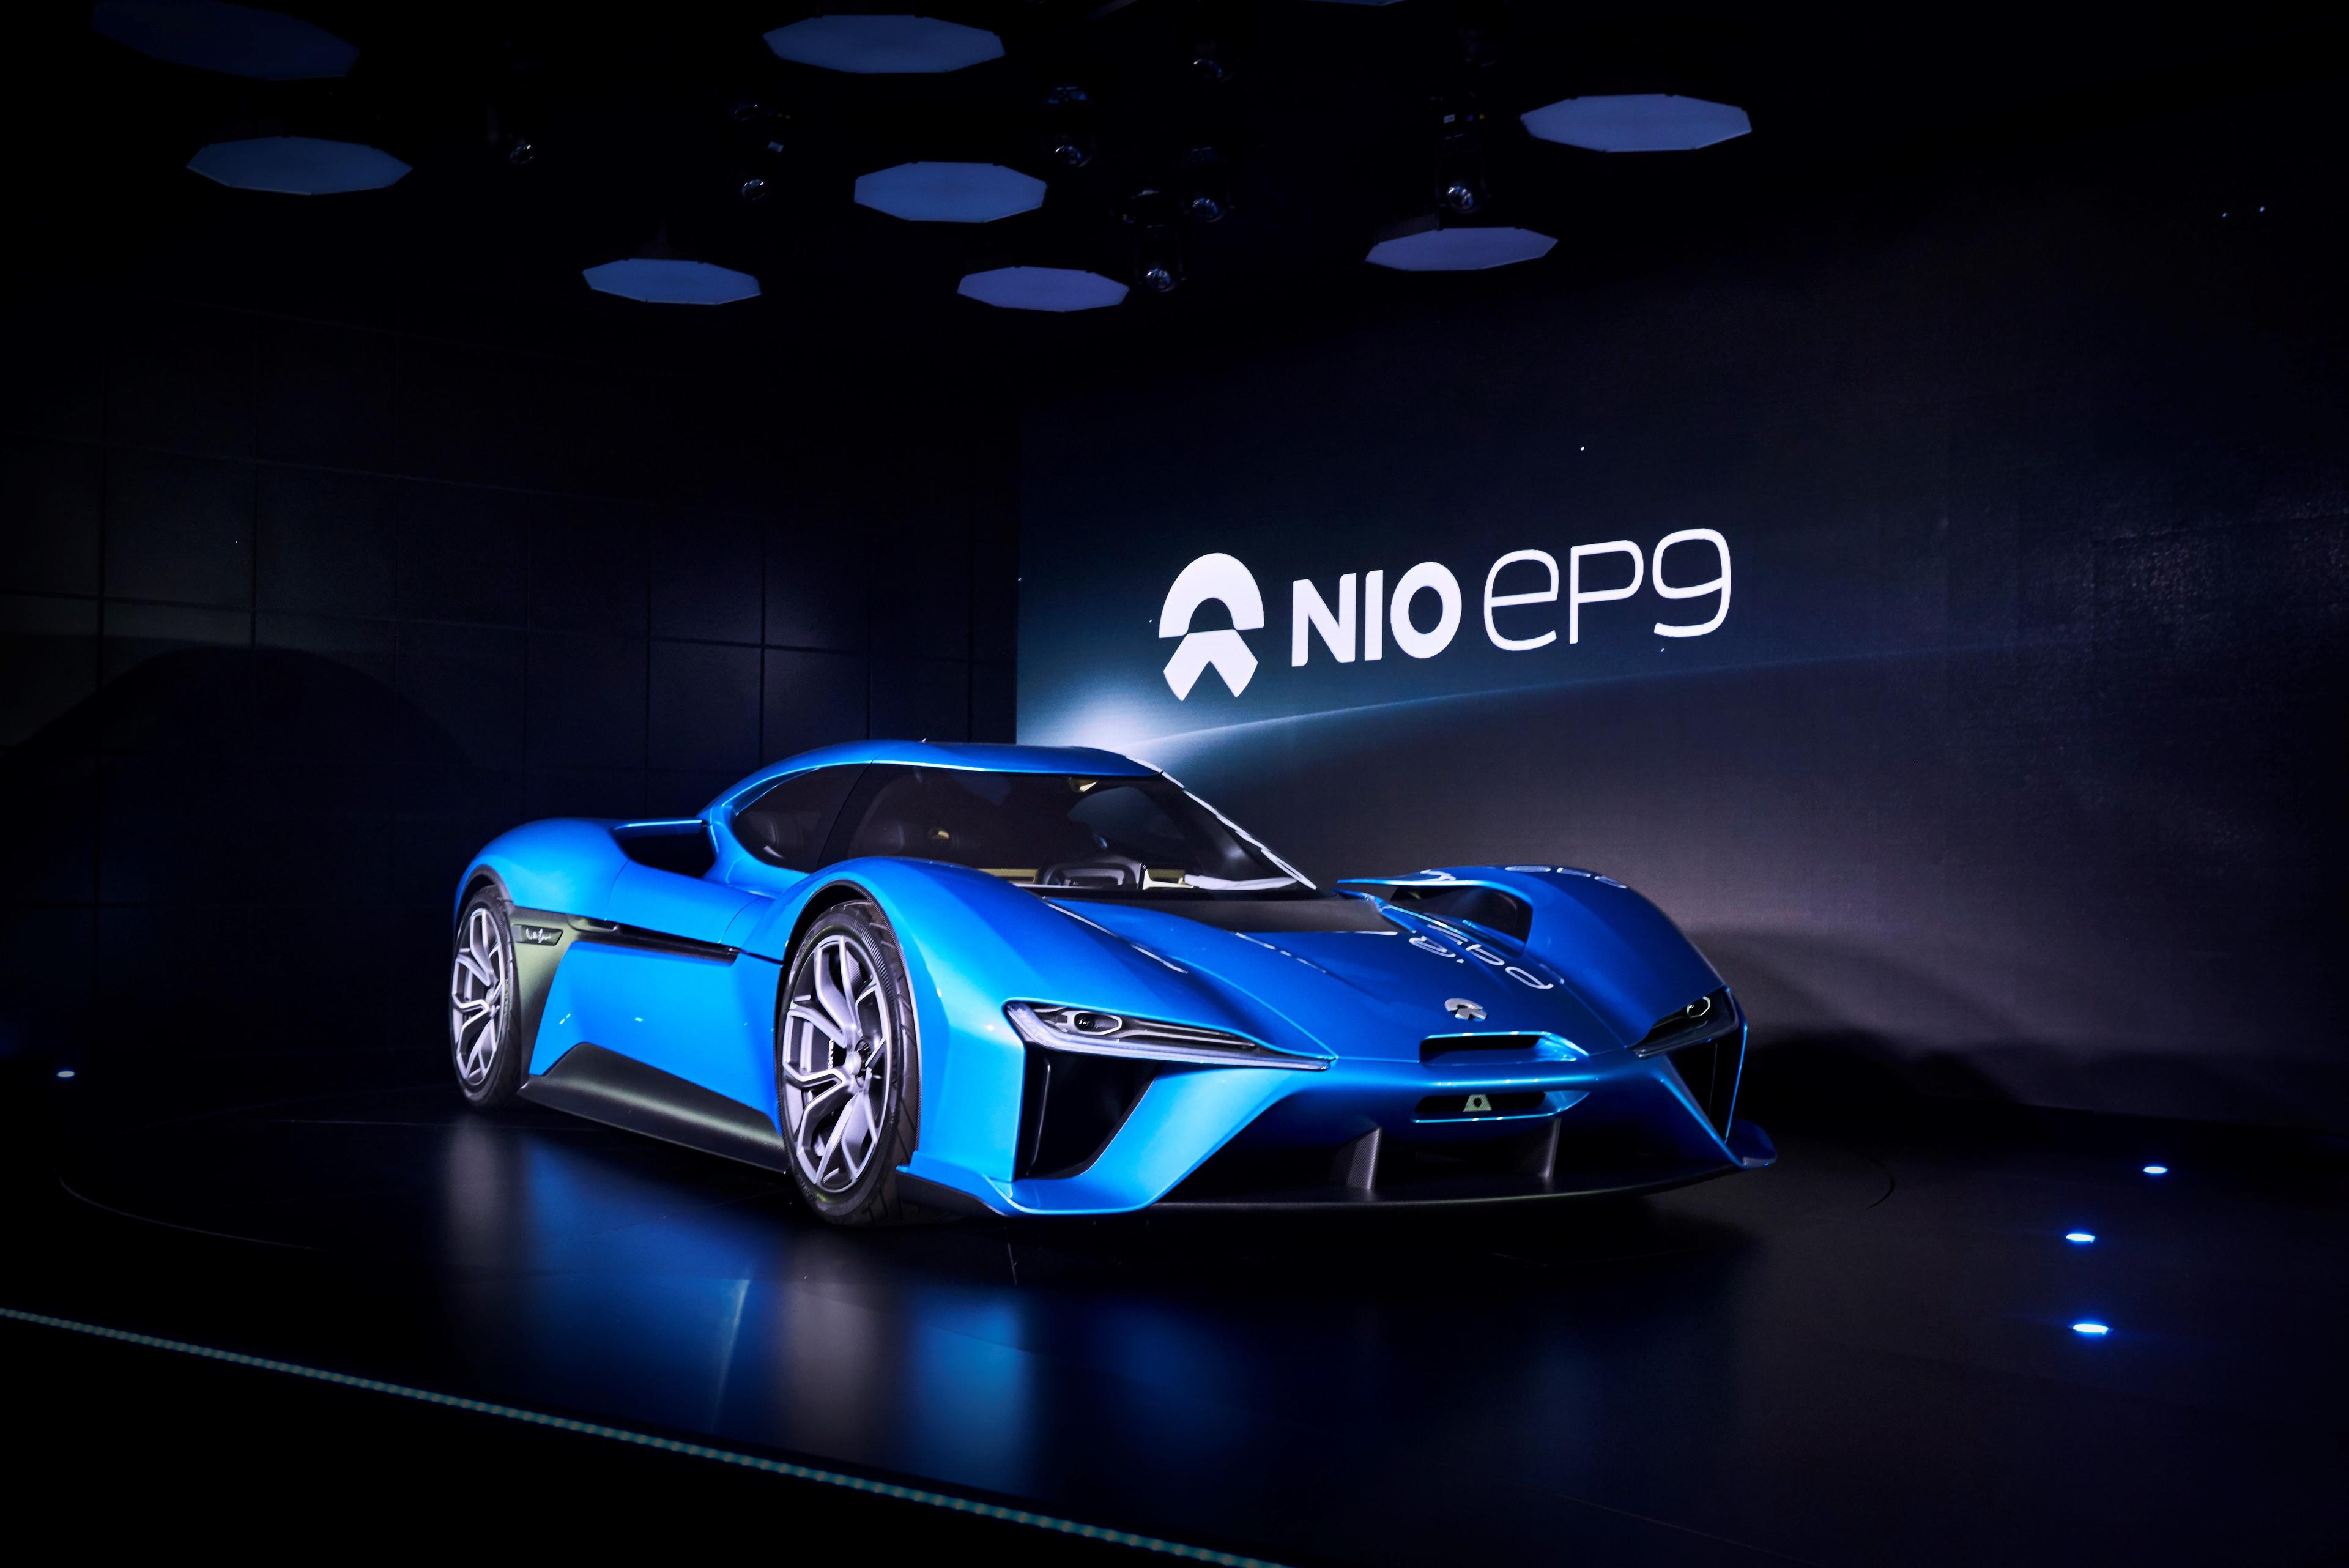 Nio fans have the same brand loyalty as Tesla enthusiasts